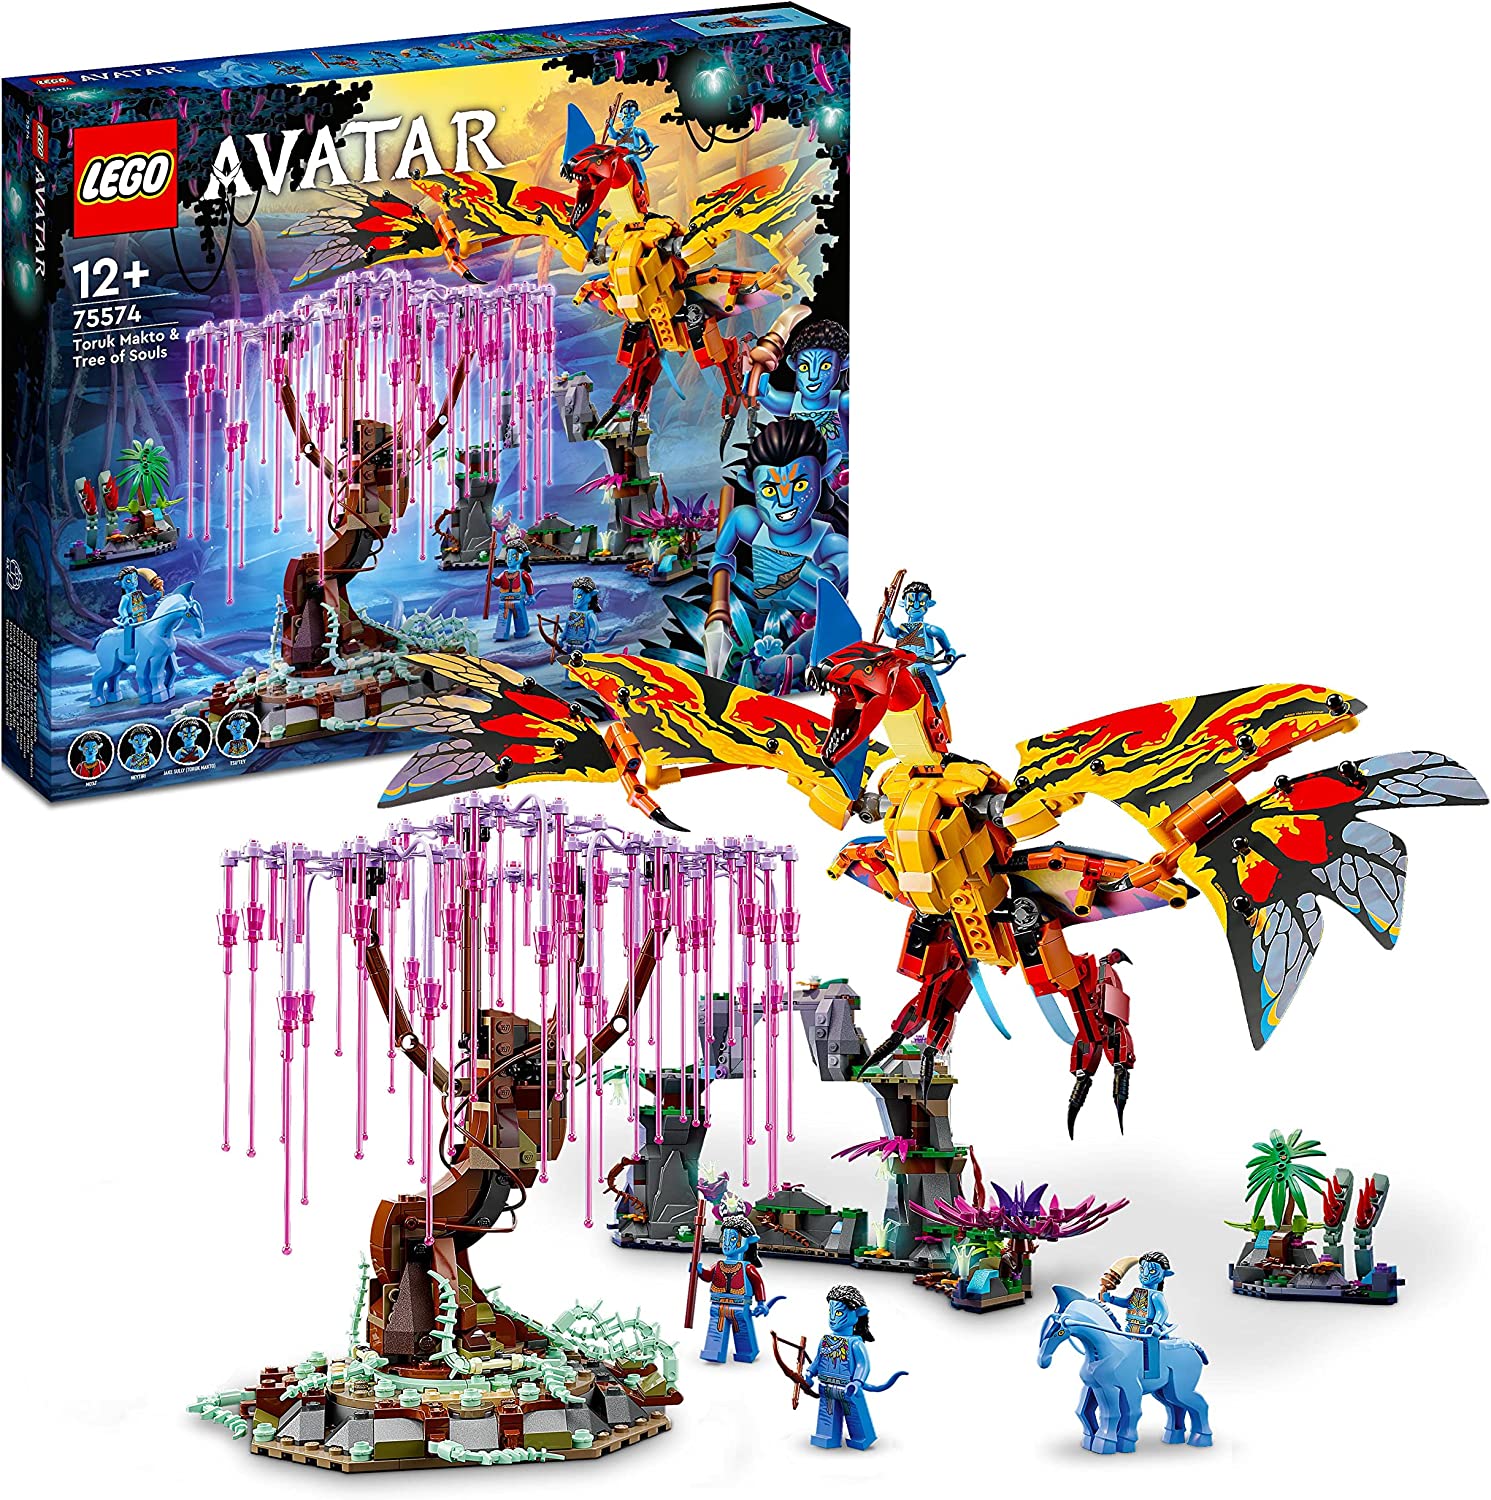 LEGO 75574 Avatar Toruk Makto & Tree of Souls, Construction Toy with Jake Sully and Thorror Horse Figures, Glow in the Dark Scenes